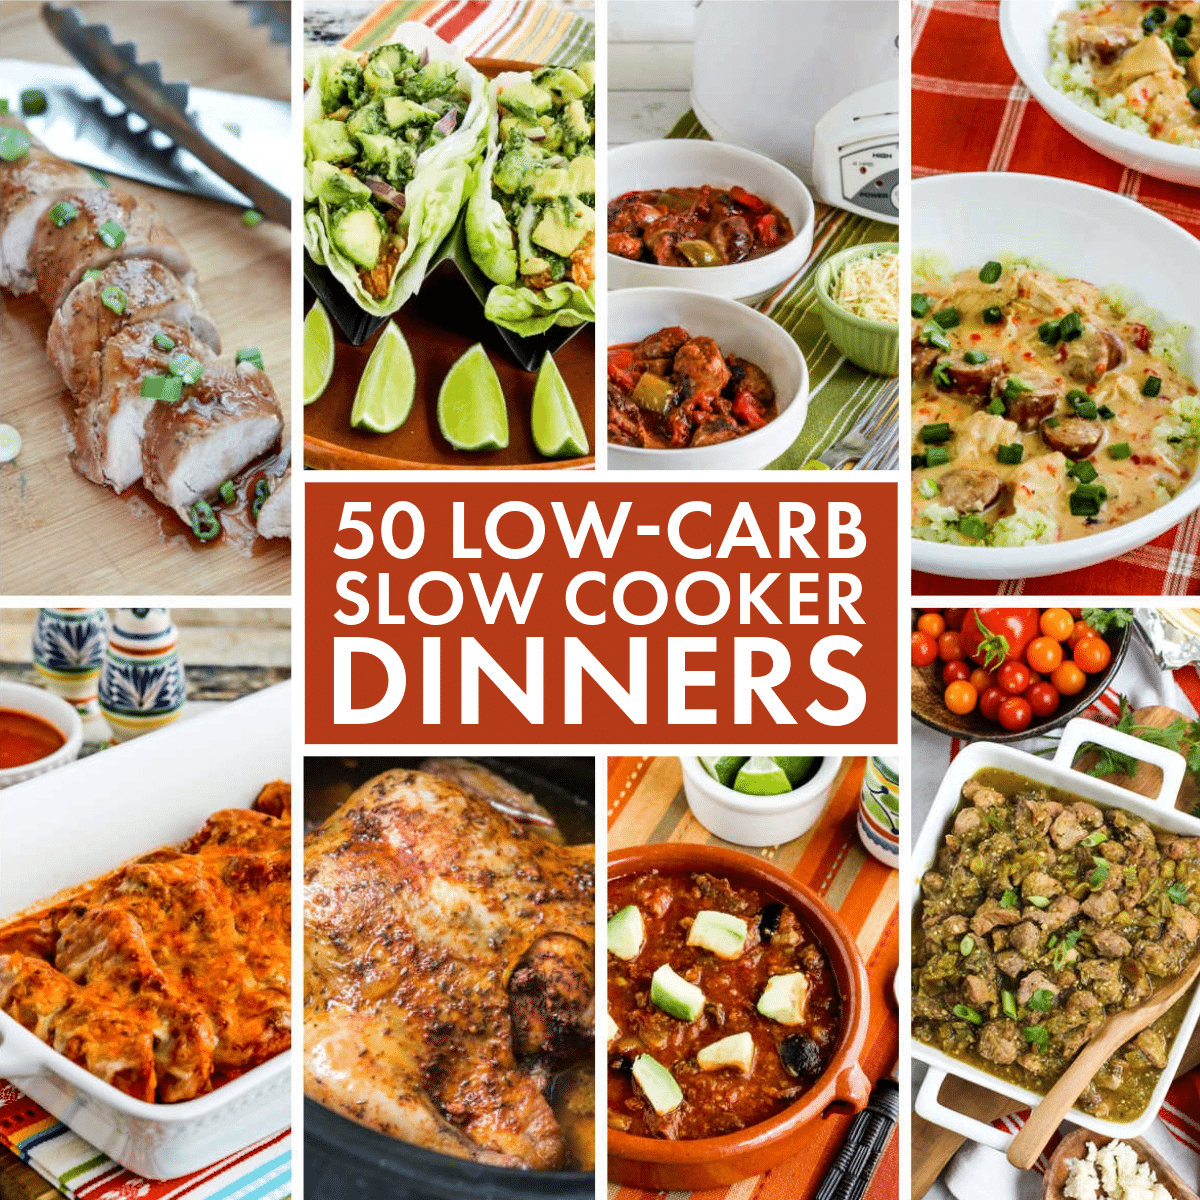 Text overlay collage for 50 Low-Carb Slow Cooker Dinners showing featured recipes.